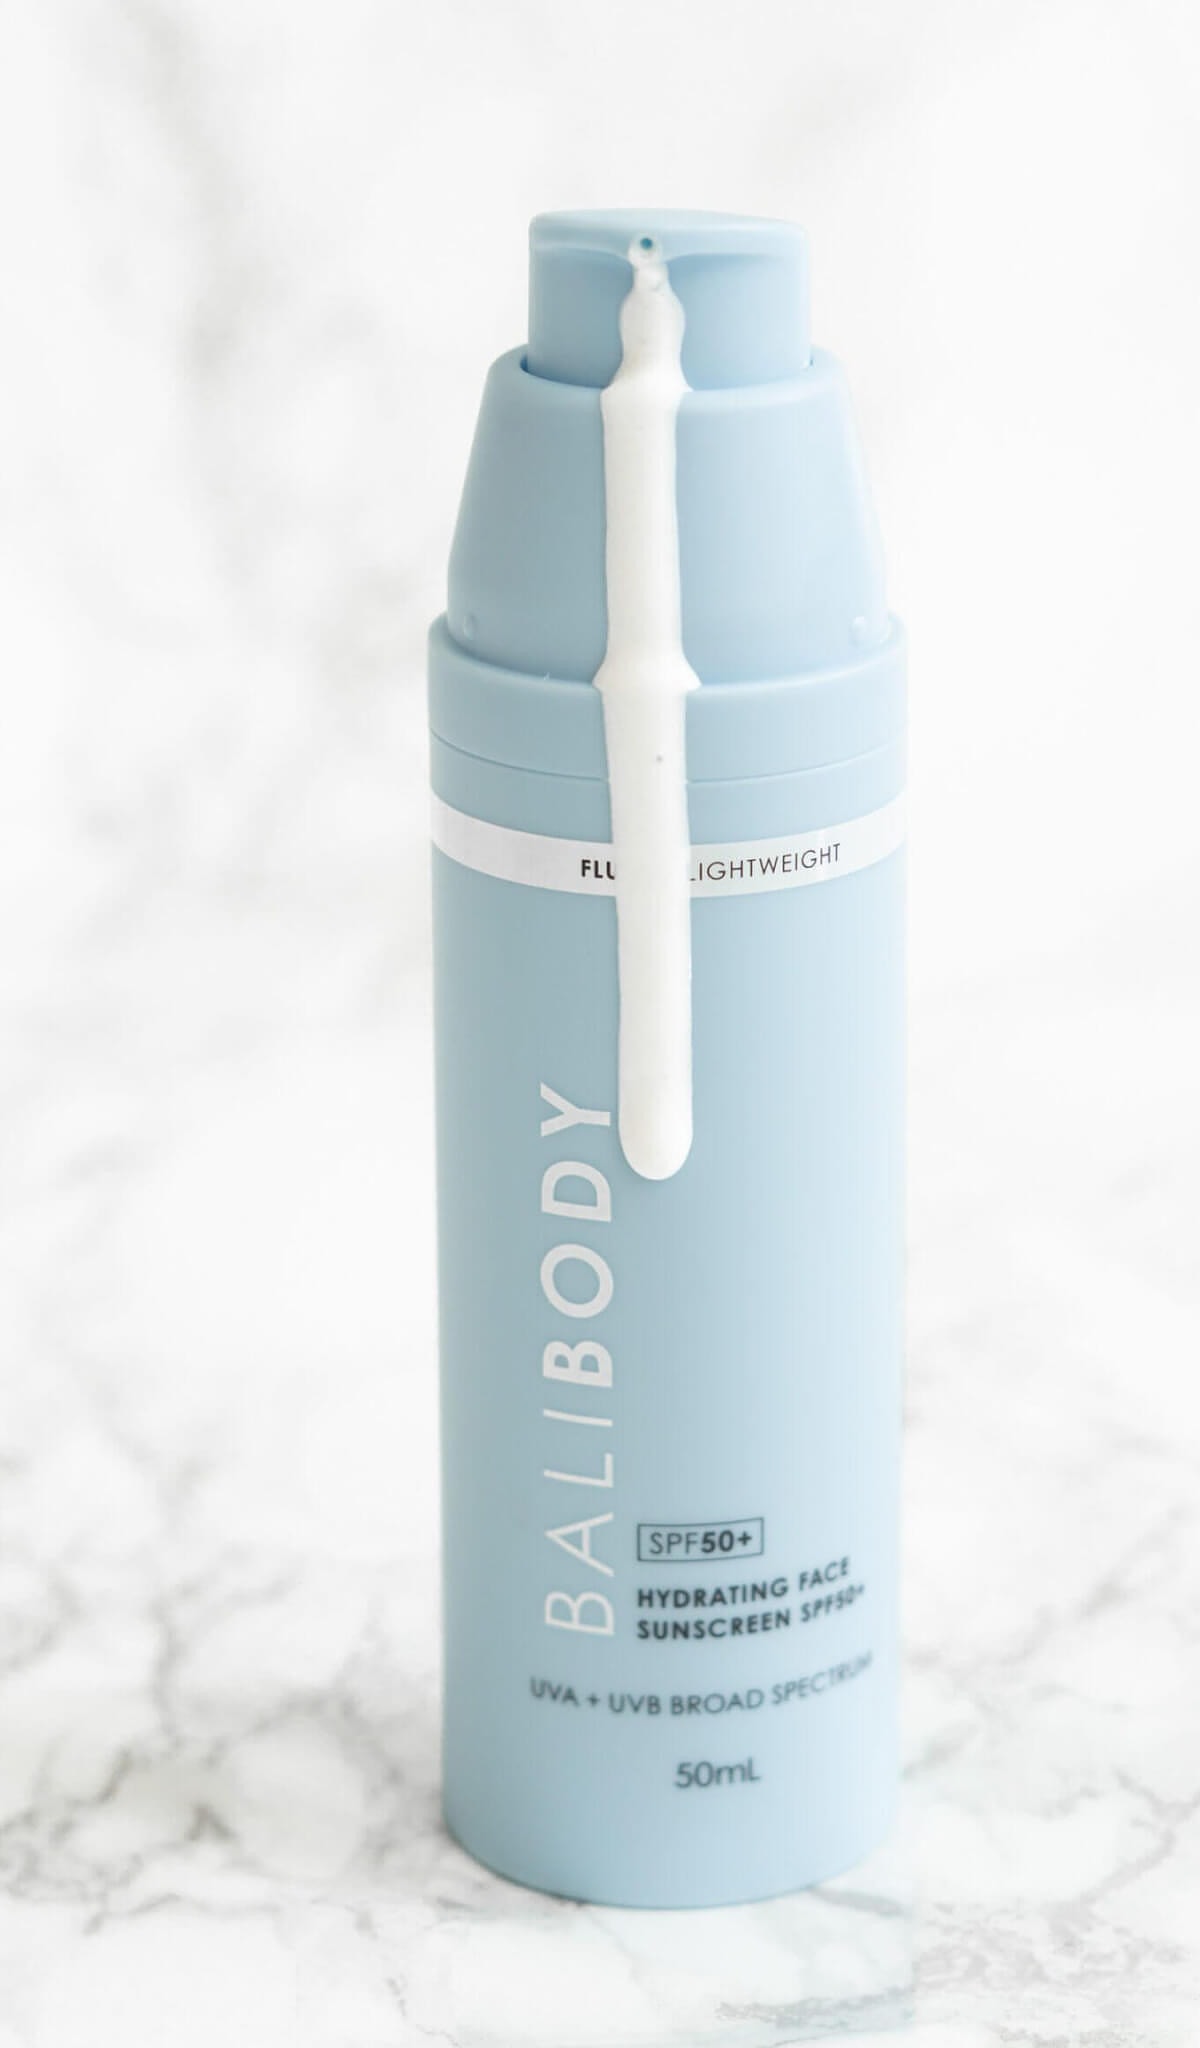 Best Sunscreen Under Makeup: 5 Reasons To Try Bali Body Hydrating Face Sunscreen